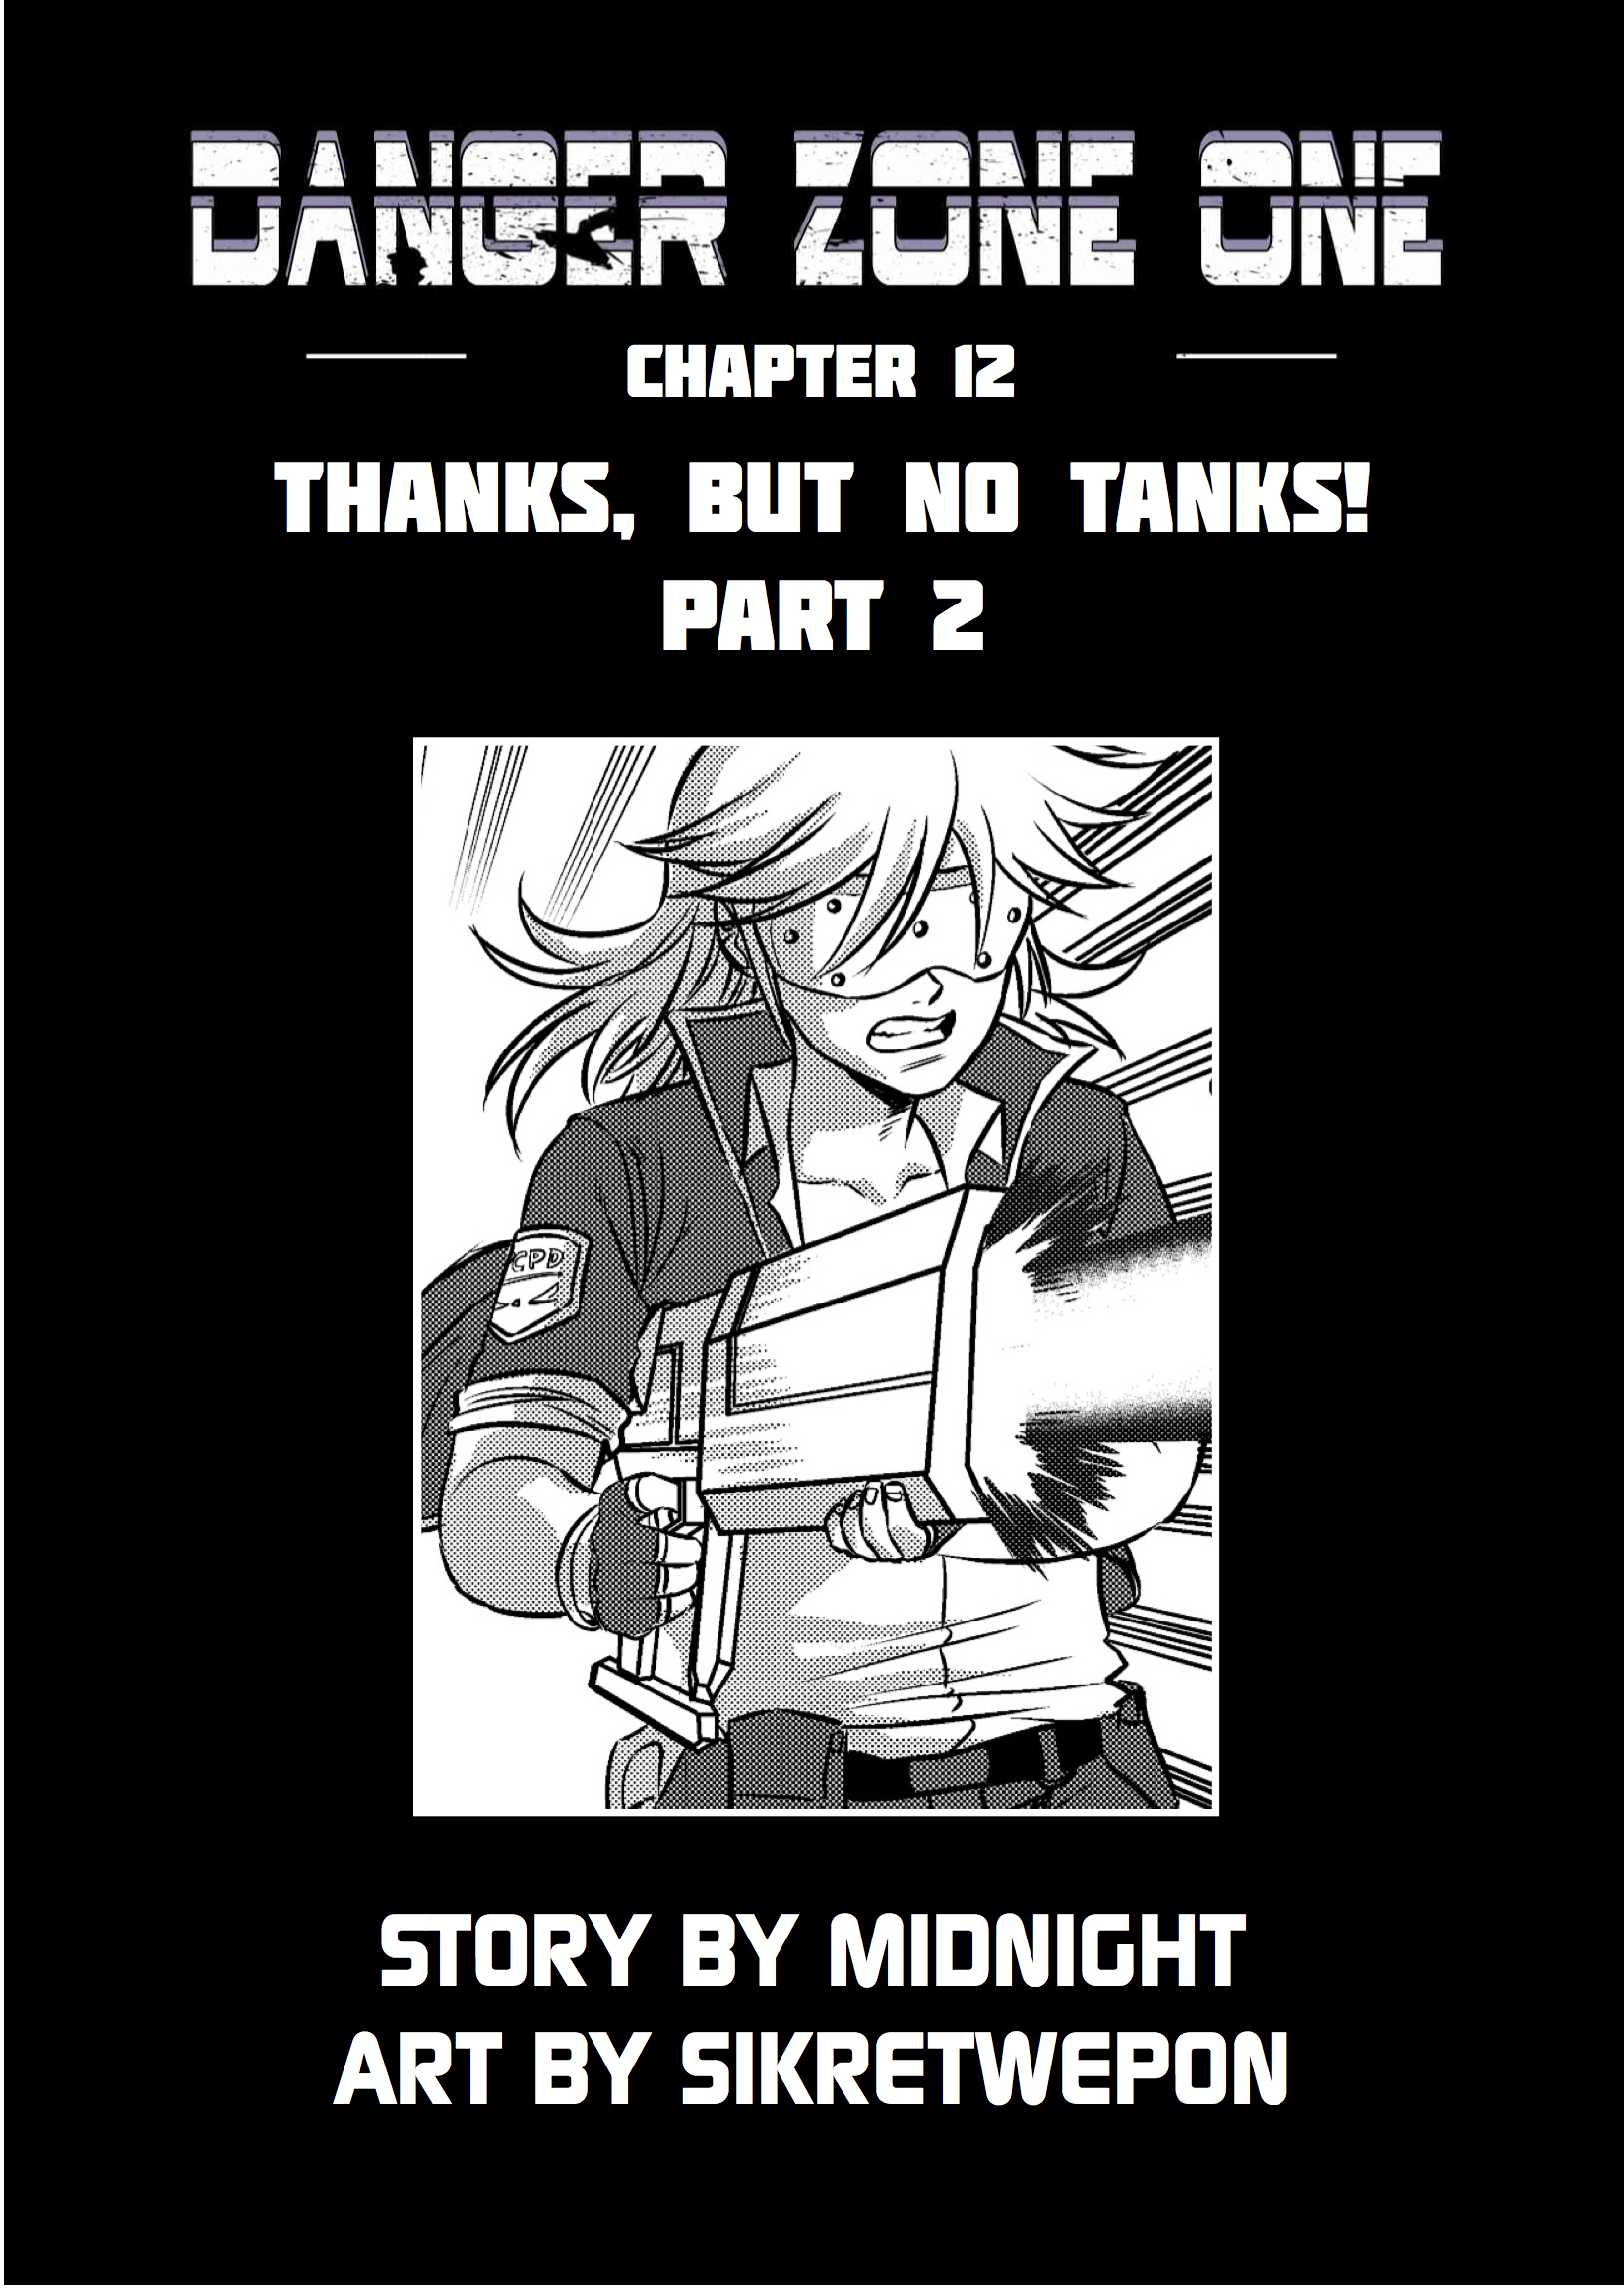 Chapter 12: Thanks, But No Tanks! Part 2